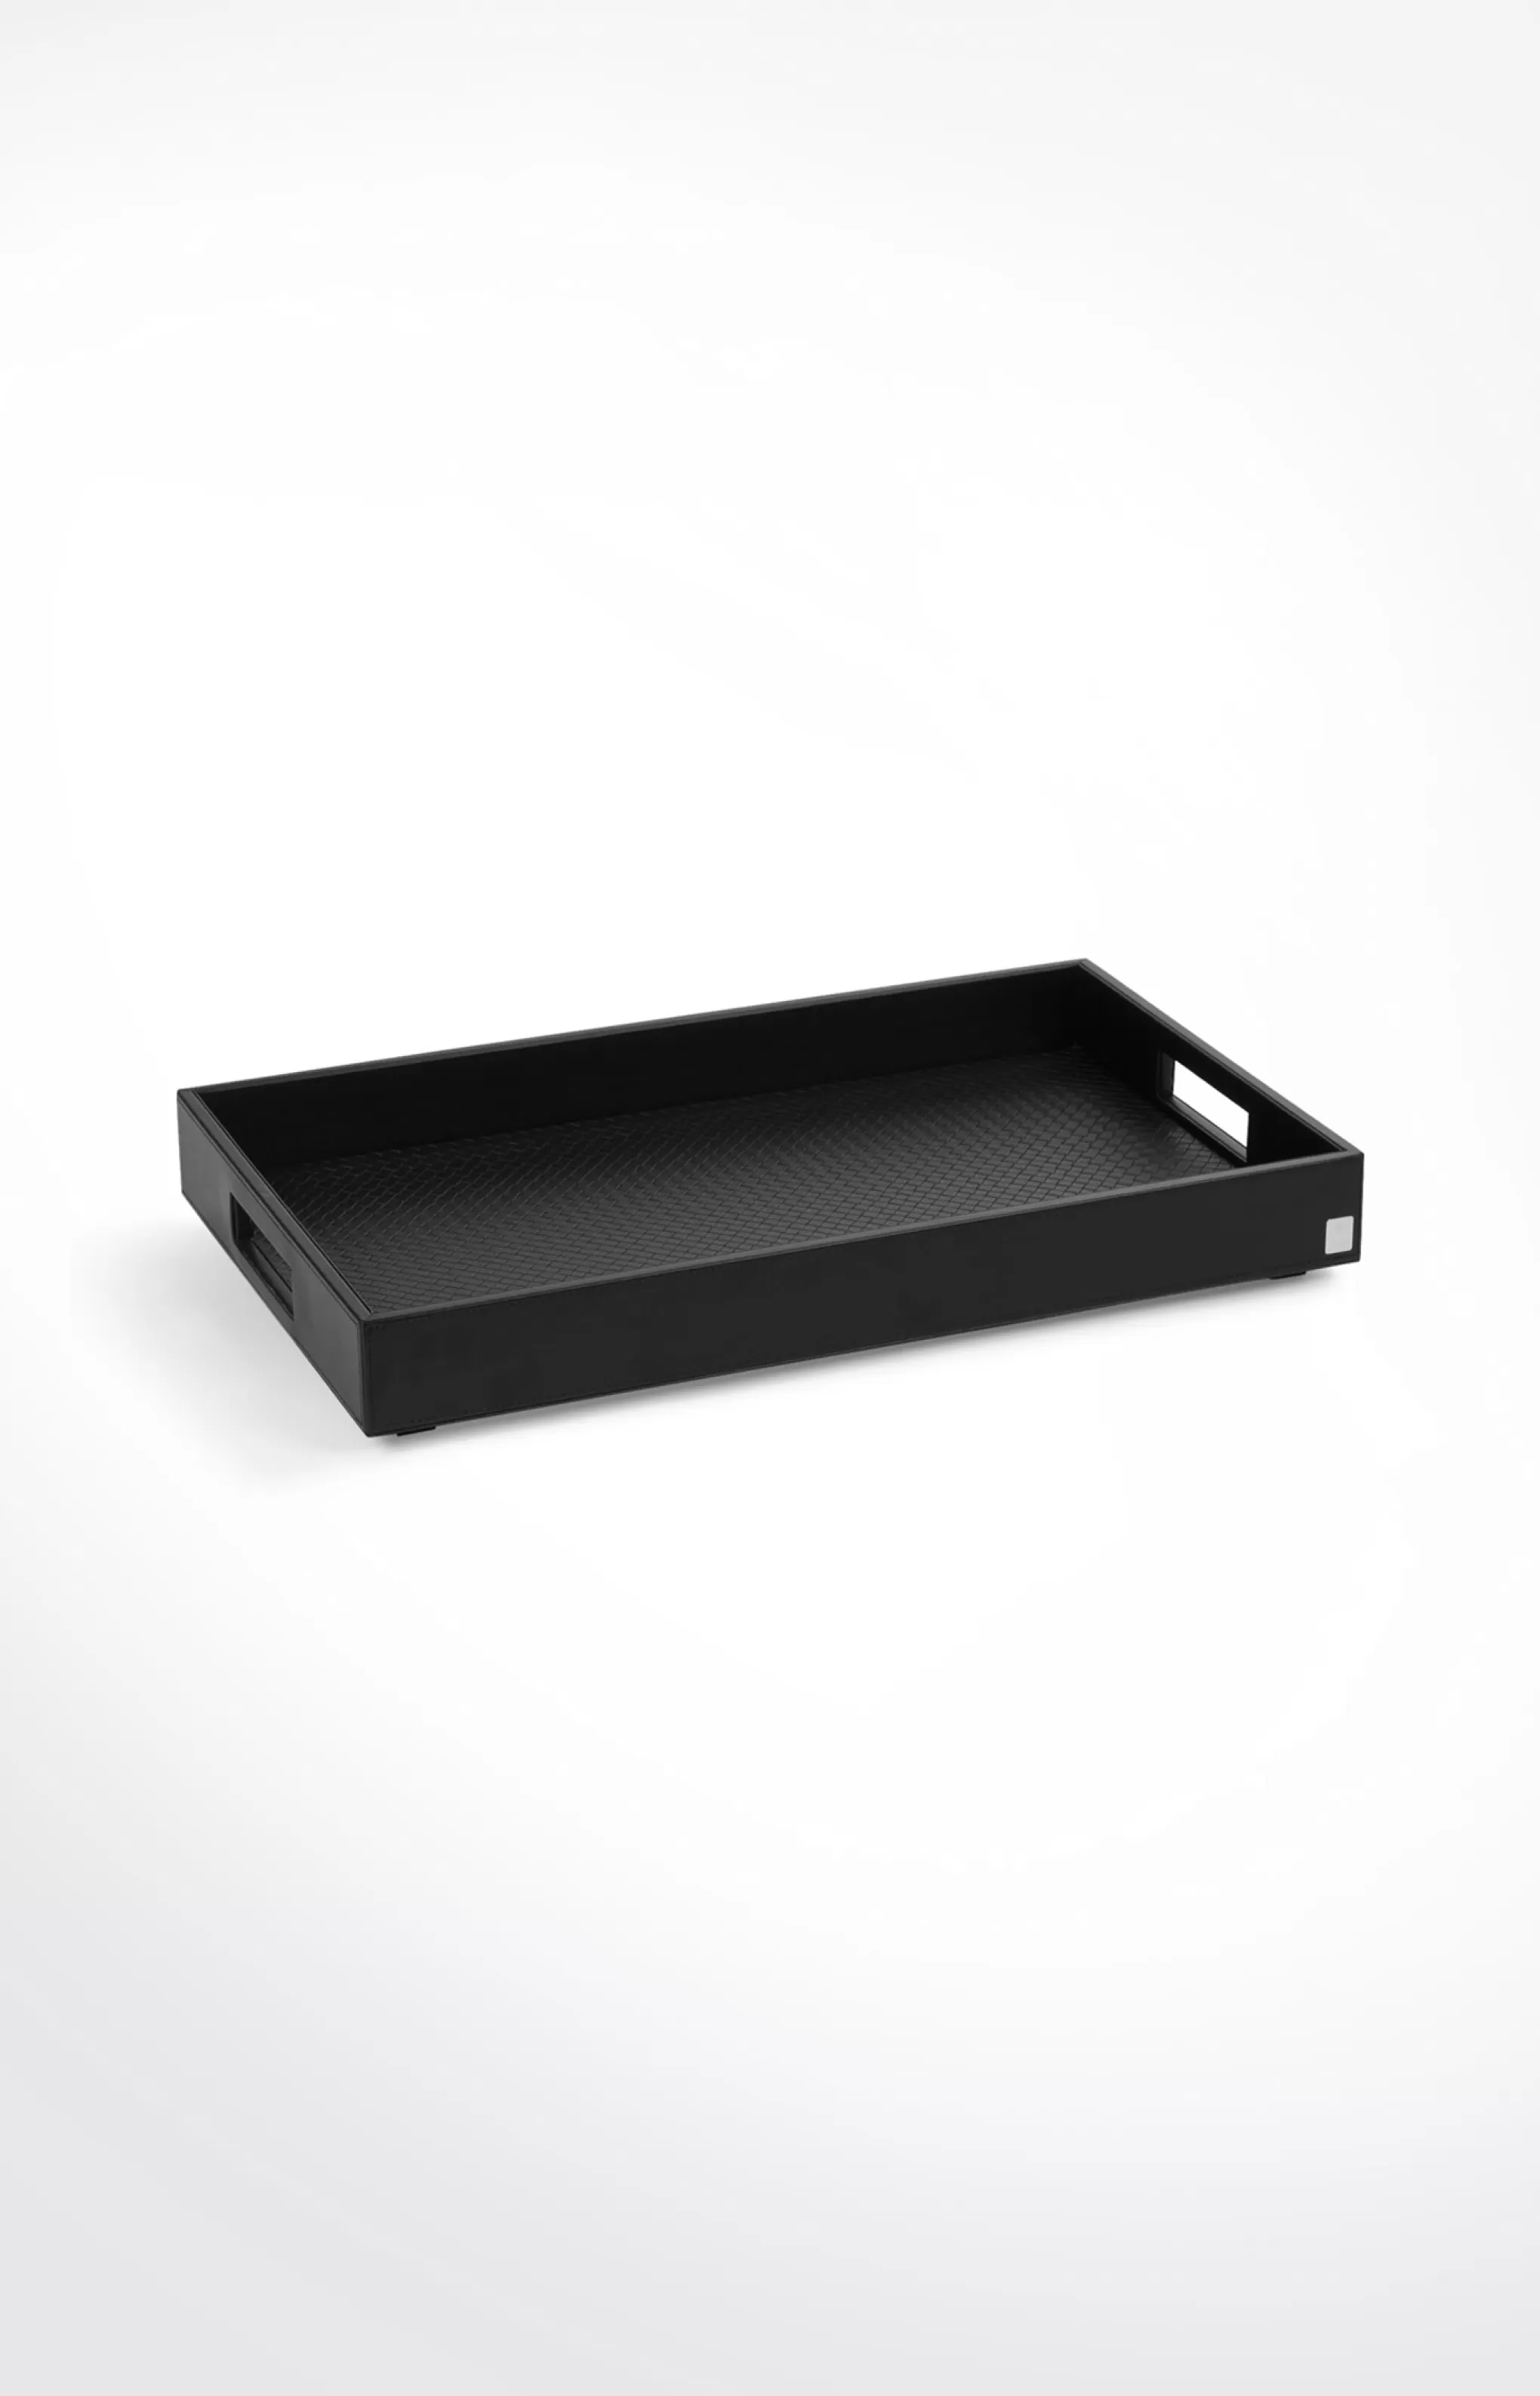 Bathroom Accessories | Discover Everything | Home Accessories | Table Accessories*JOOP Bathroom Accessories | Discover Everything | Home Accessories | Table Accessories Homeline tray, black